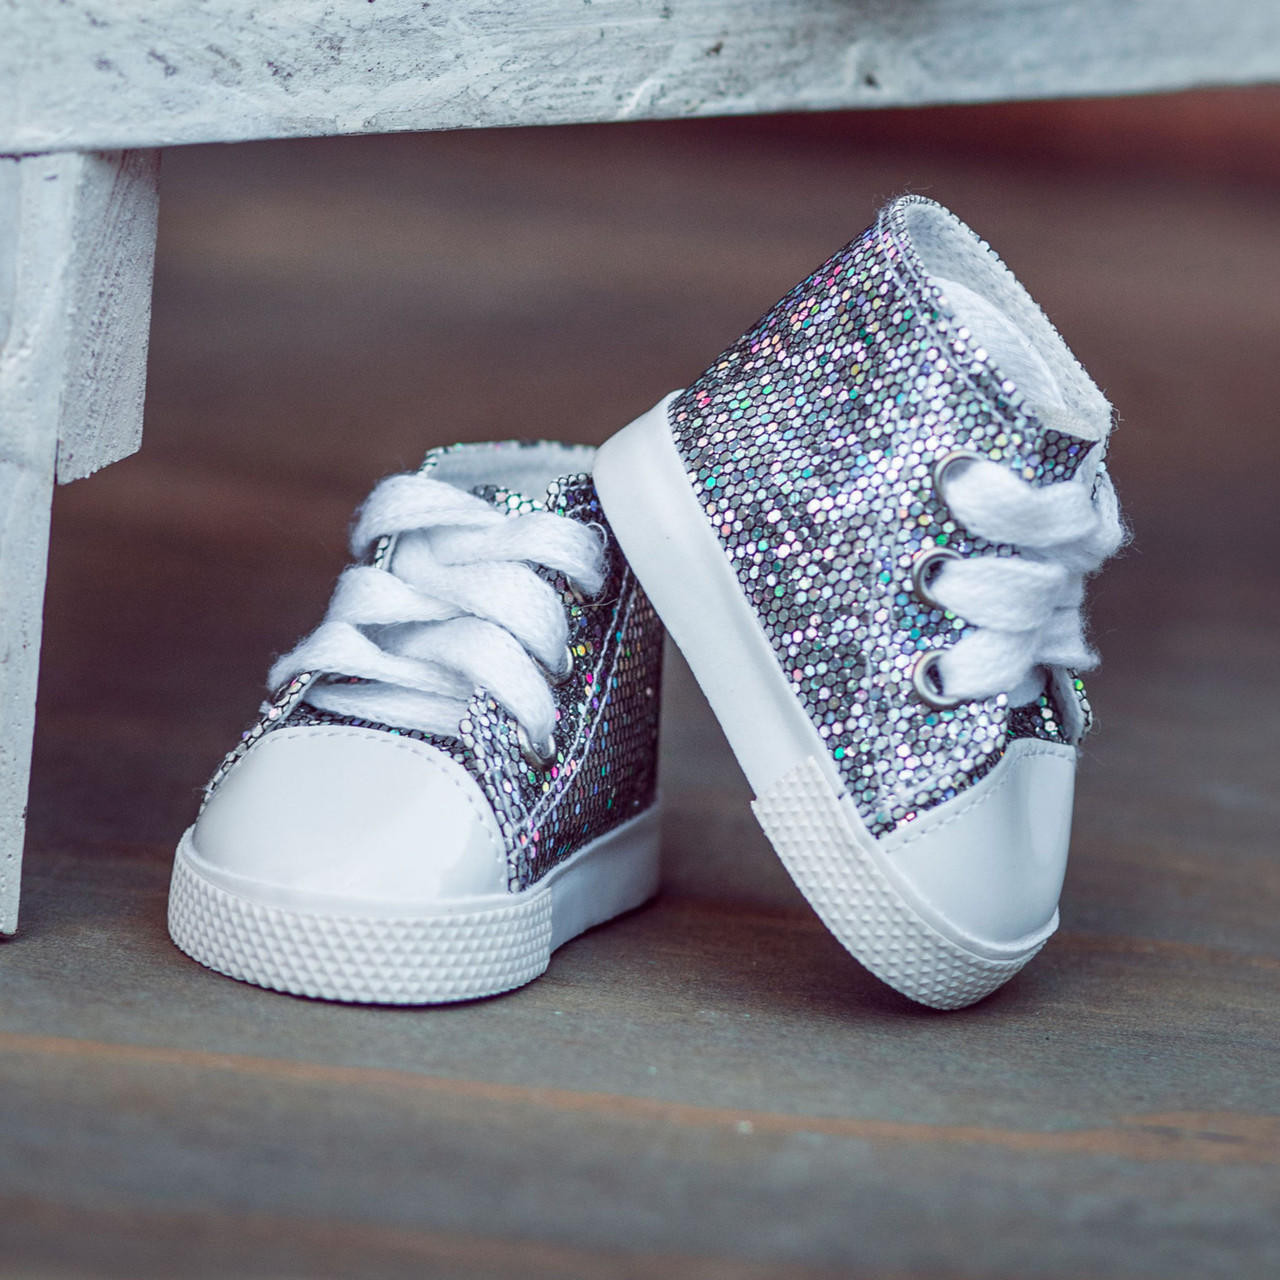 Set of 2 Pair of Glitter Sneaker Shoes for 18 Dolls